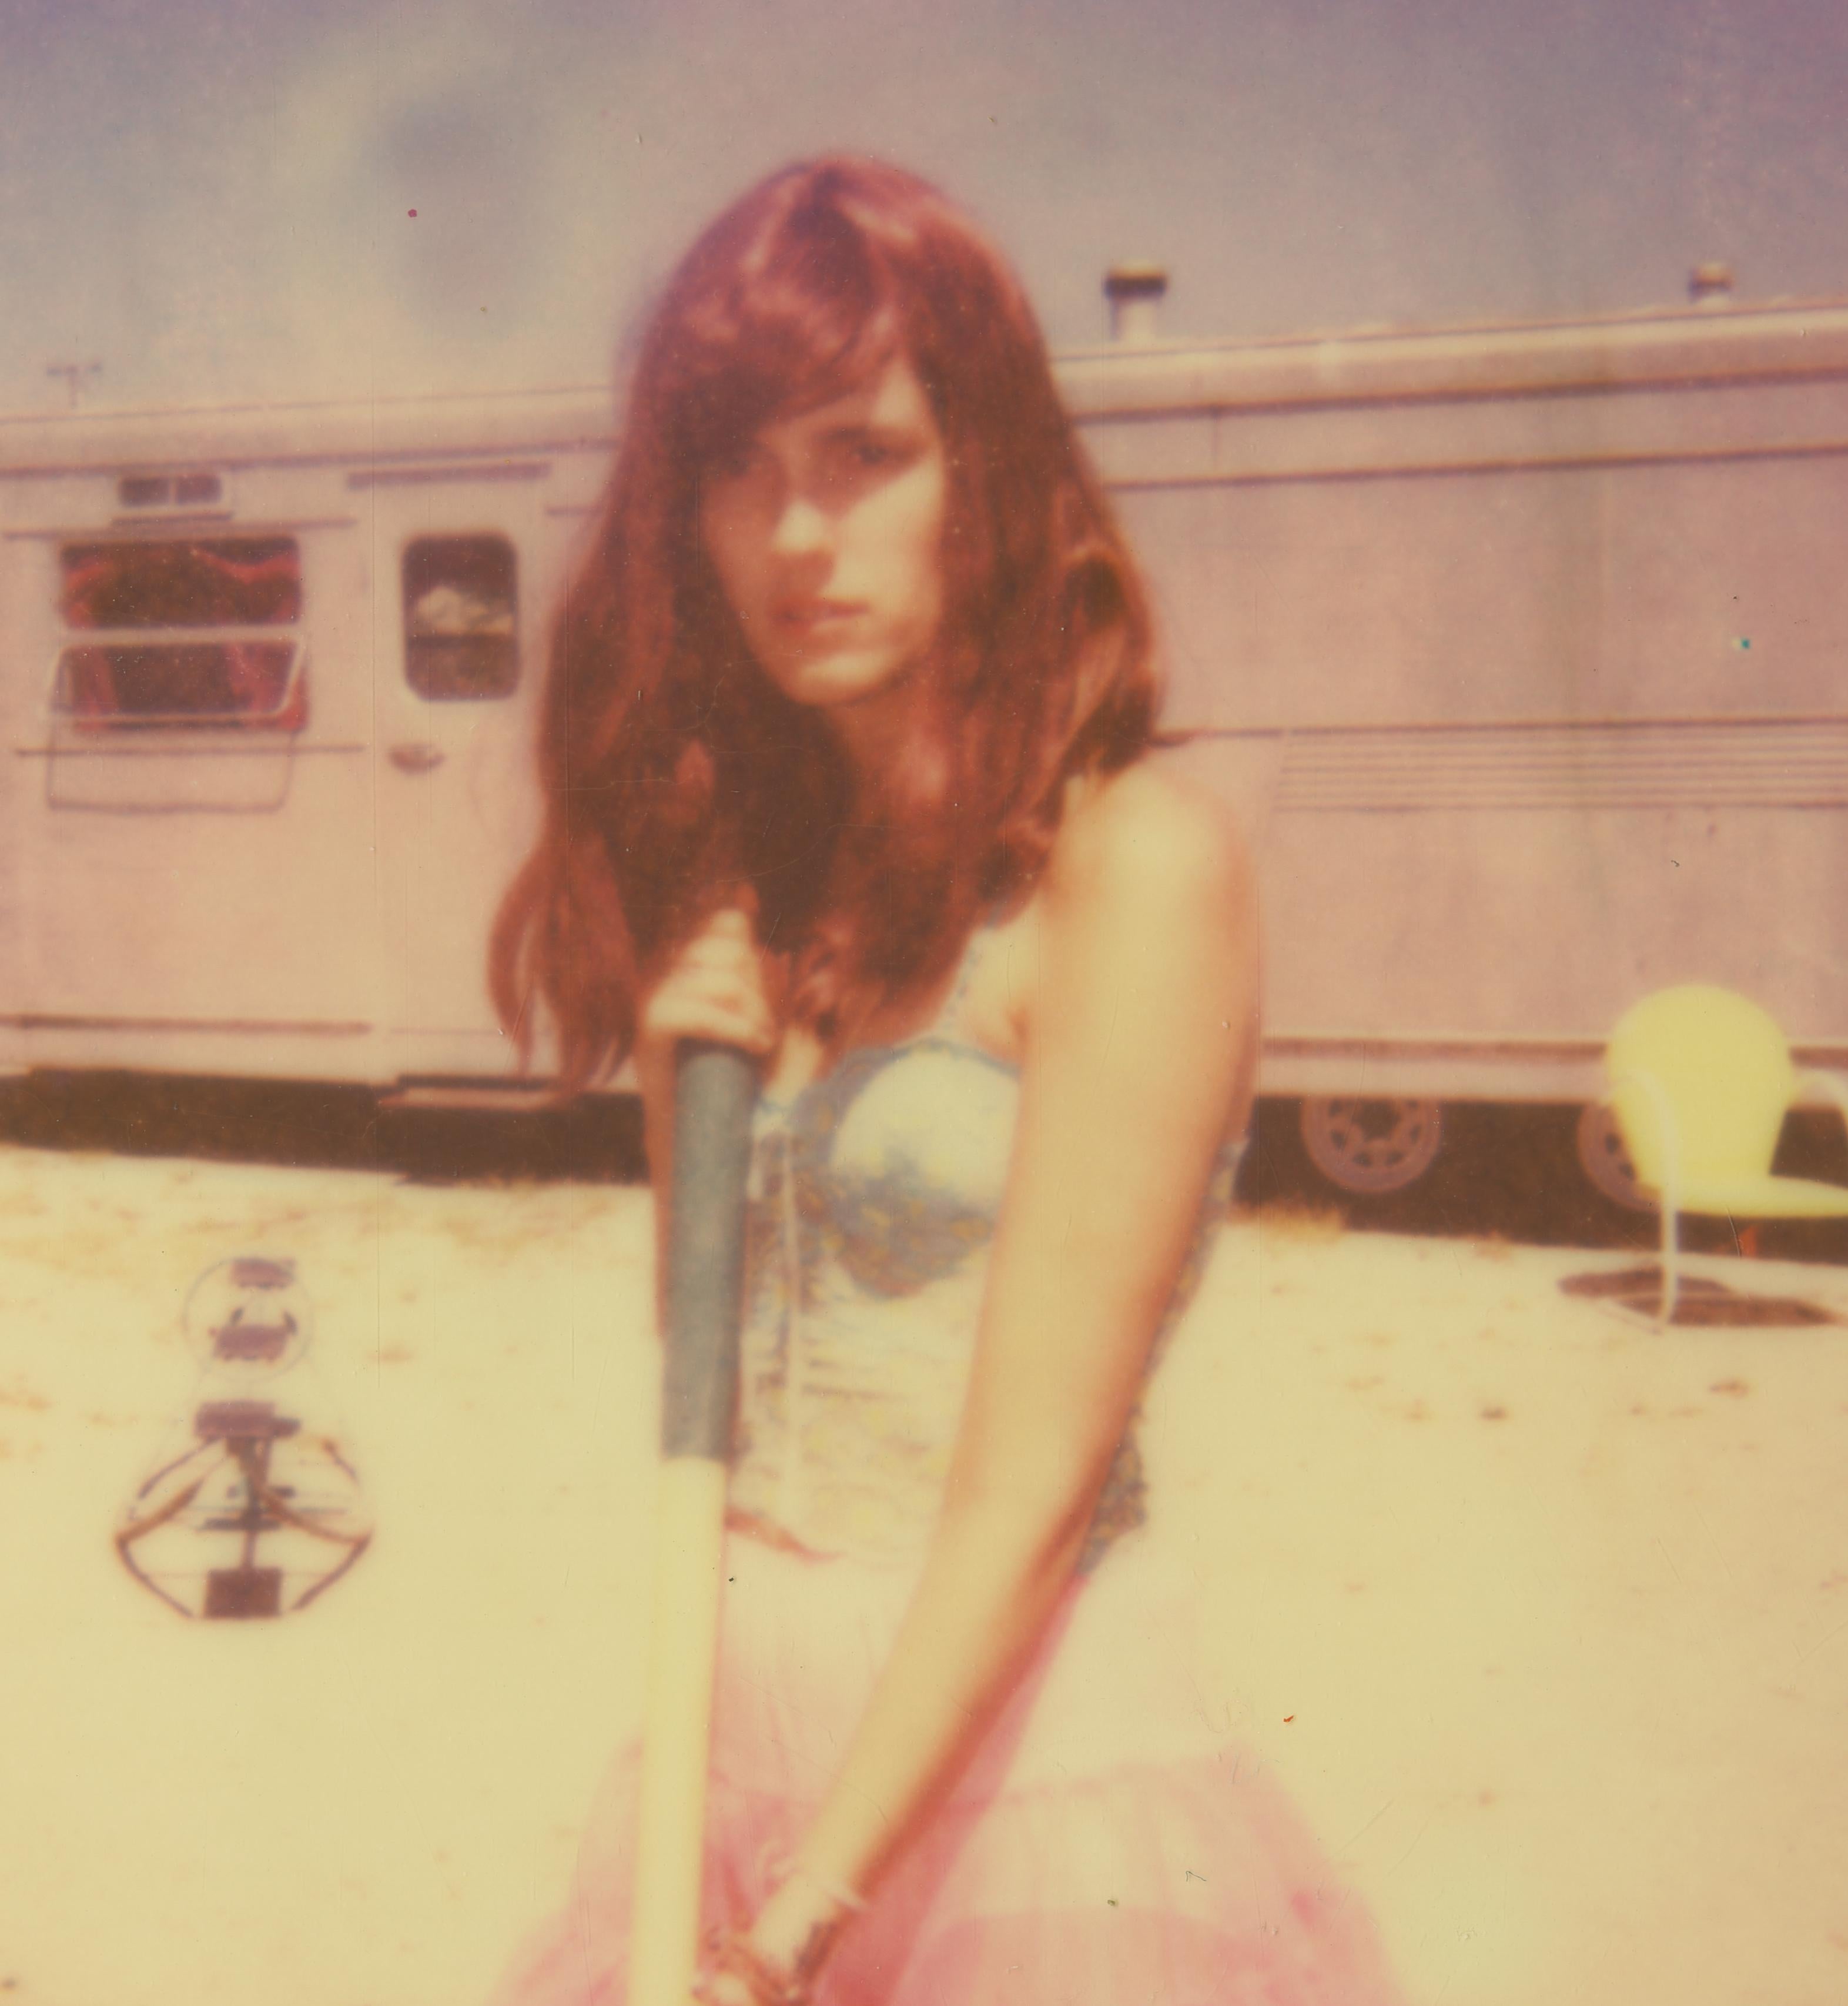 A lonely and deserted Place (The Girl behind the White Picket Fence) - Polaroid - Photograph by Stefanie Schneider